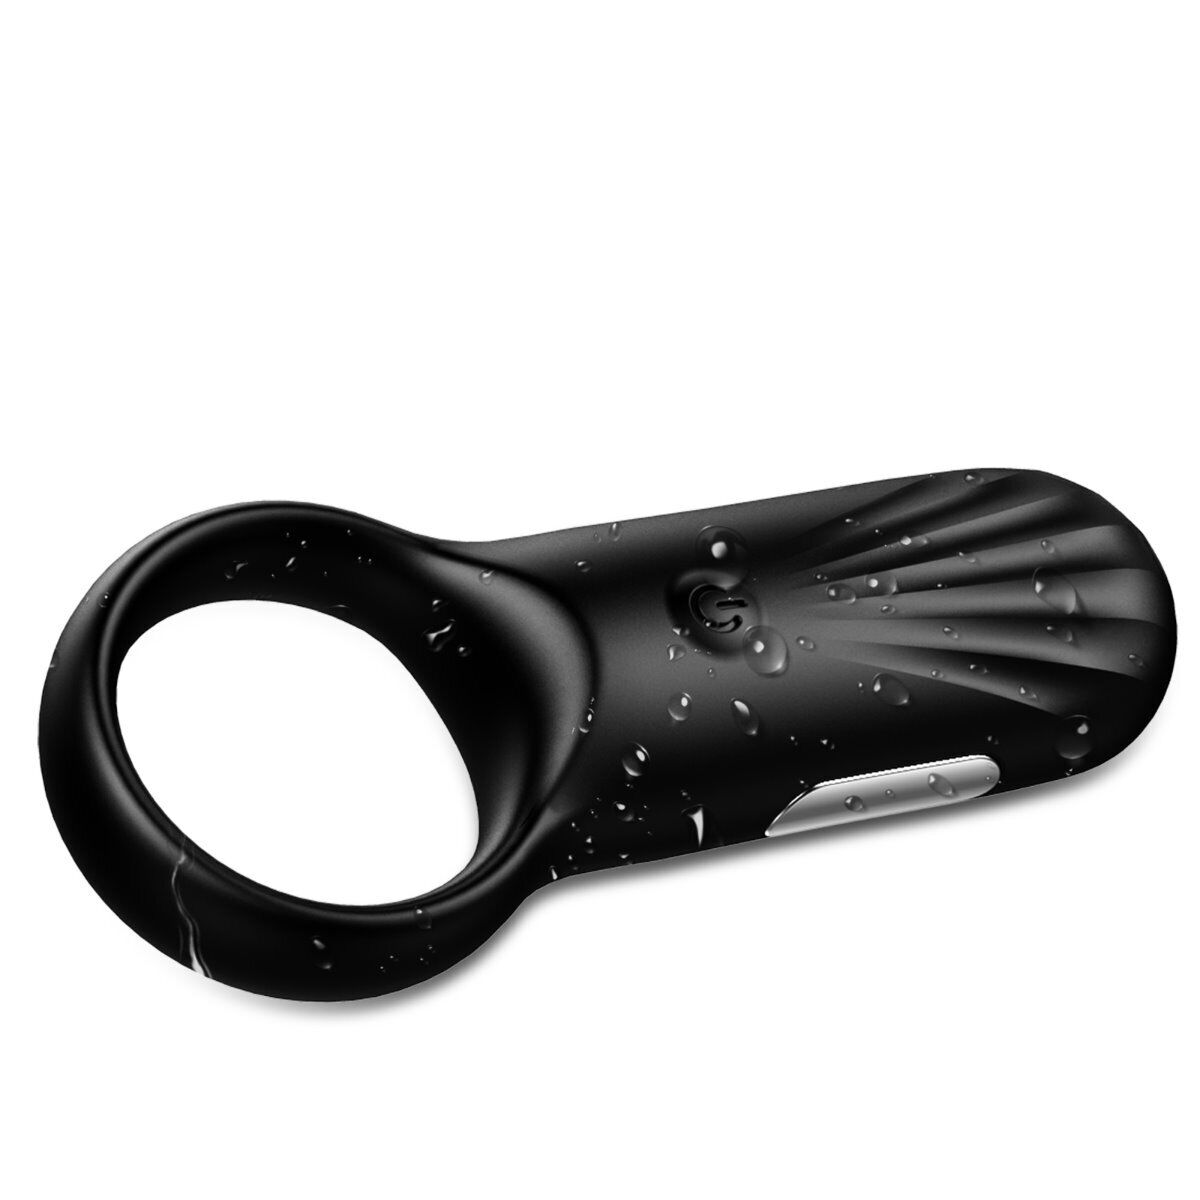 Rechargeable Vibrating Penis Cock Ring Prolong Delay Sex Toys for Men Couples